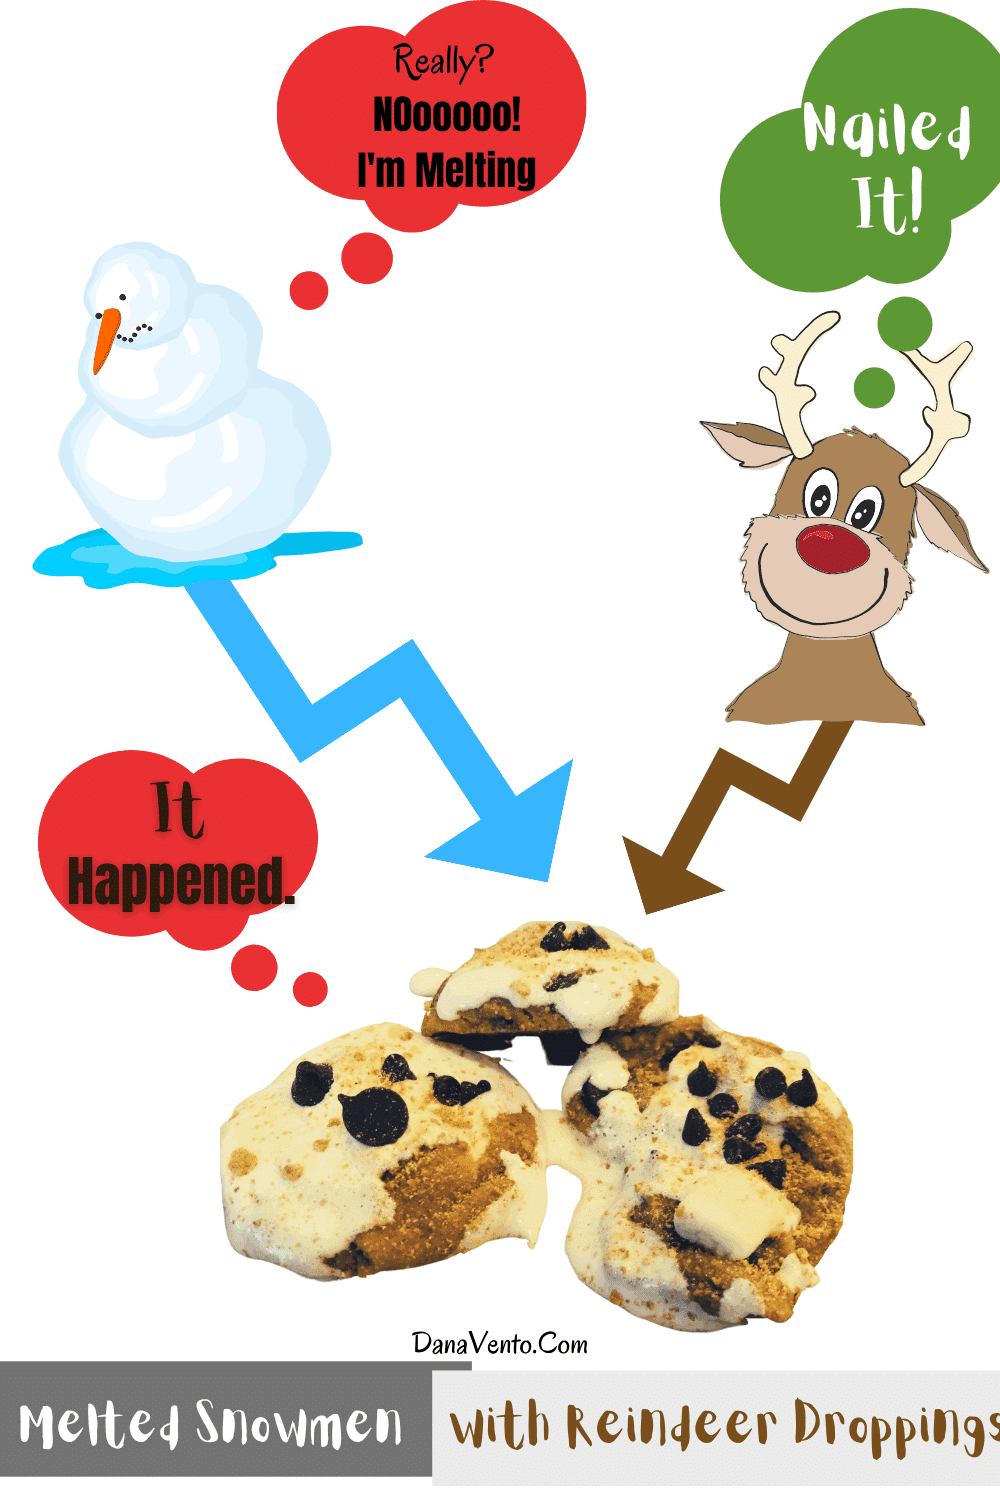 How Melted Snowmen with Reindeer Droppings Happened 